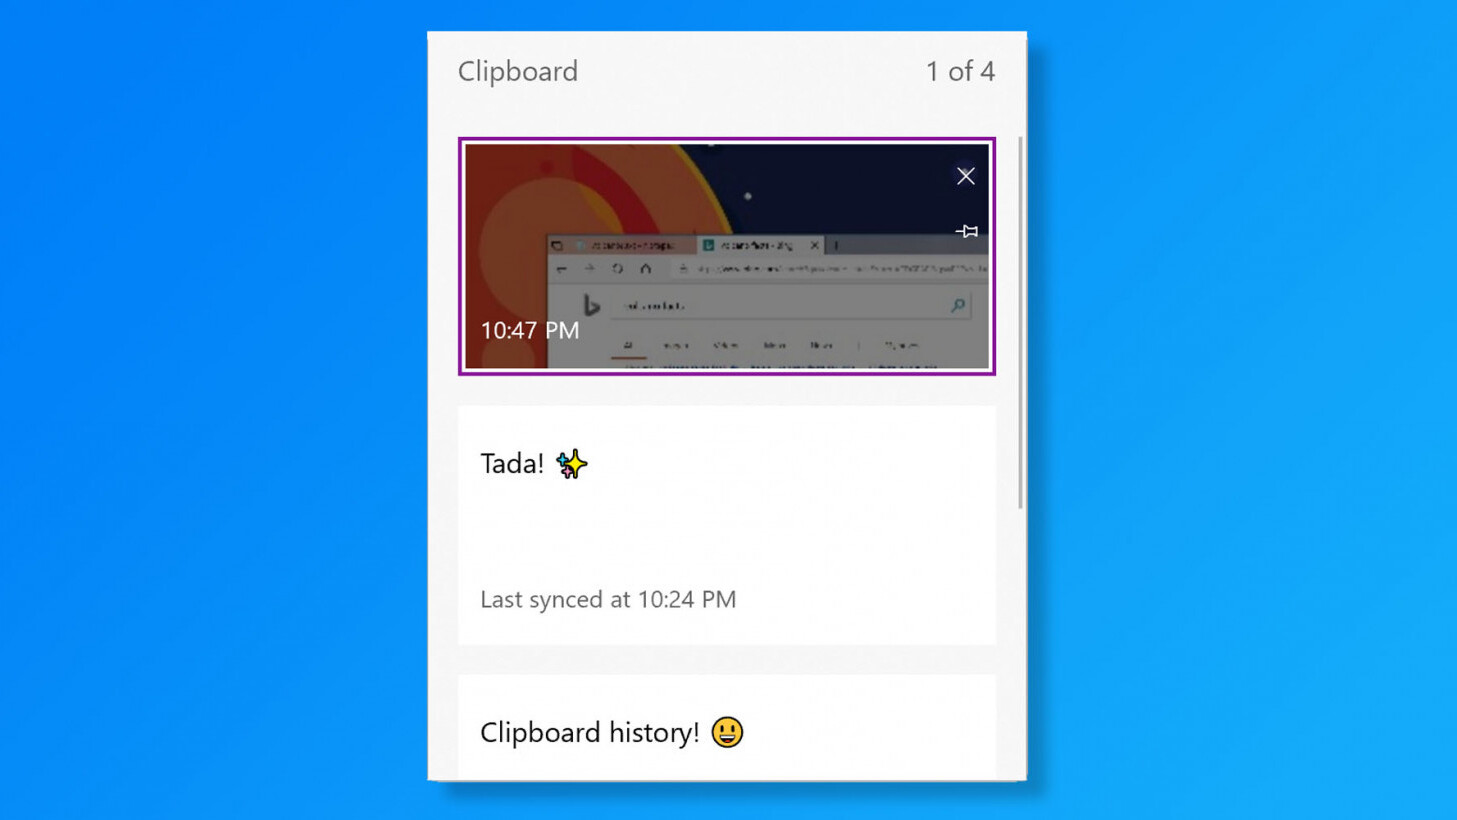 Windows 10’s new clipboard takes the pain out of copy and pasting